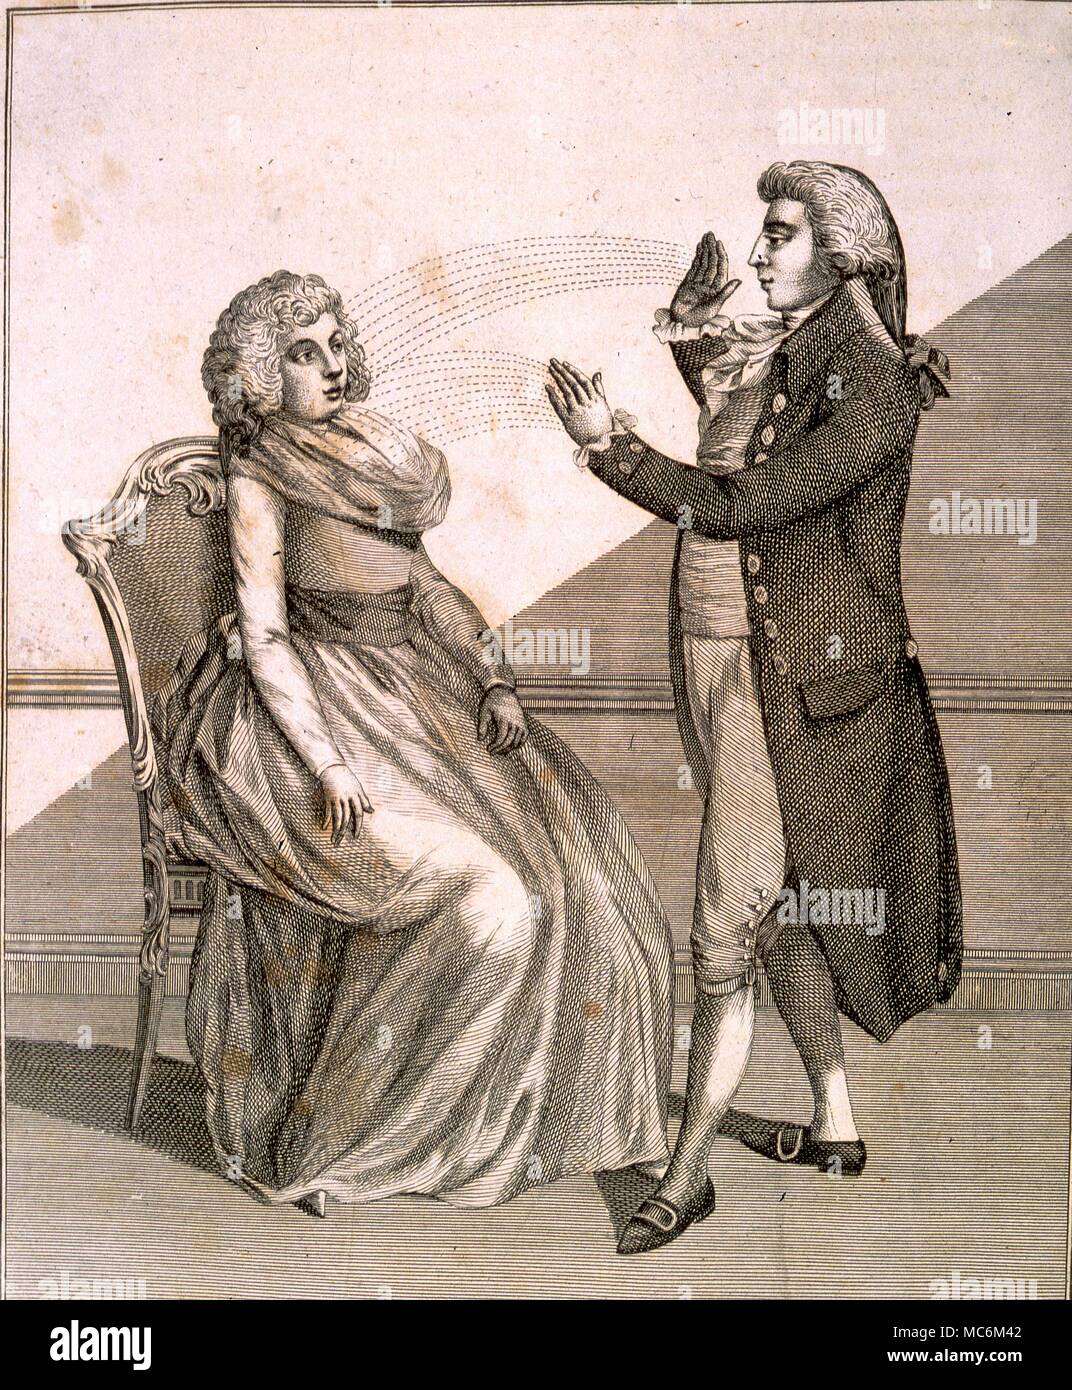 Hypnotism - Mesmerism late 18th century engraviing of a mesmerist influencing a woman with hand passes. From Ebenezer Sibly's A Key to Physics and the Occult Sciences 1794 Stock Photo